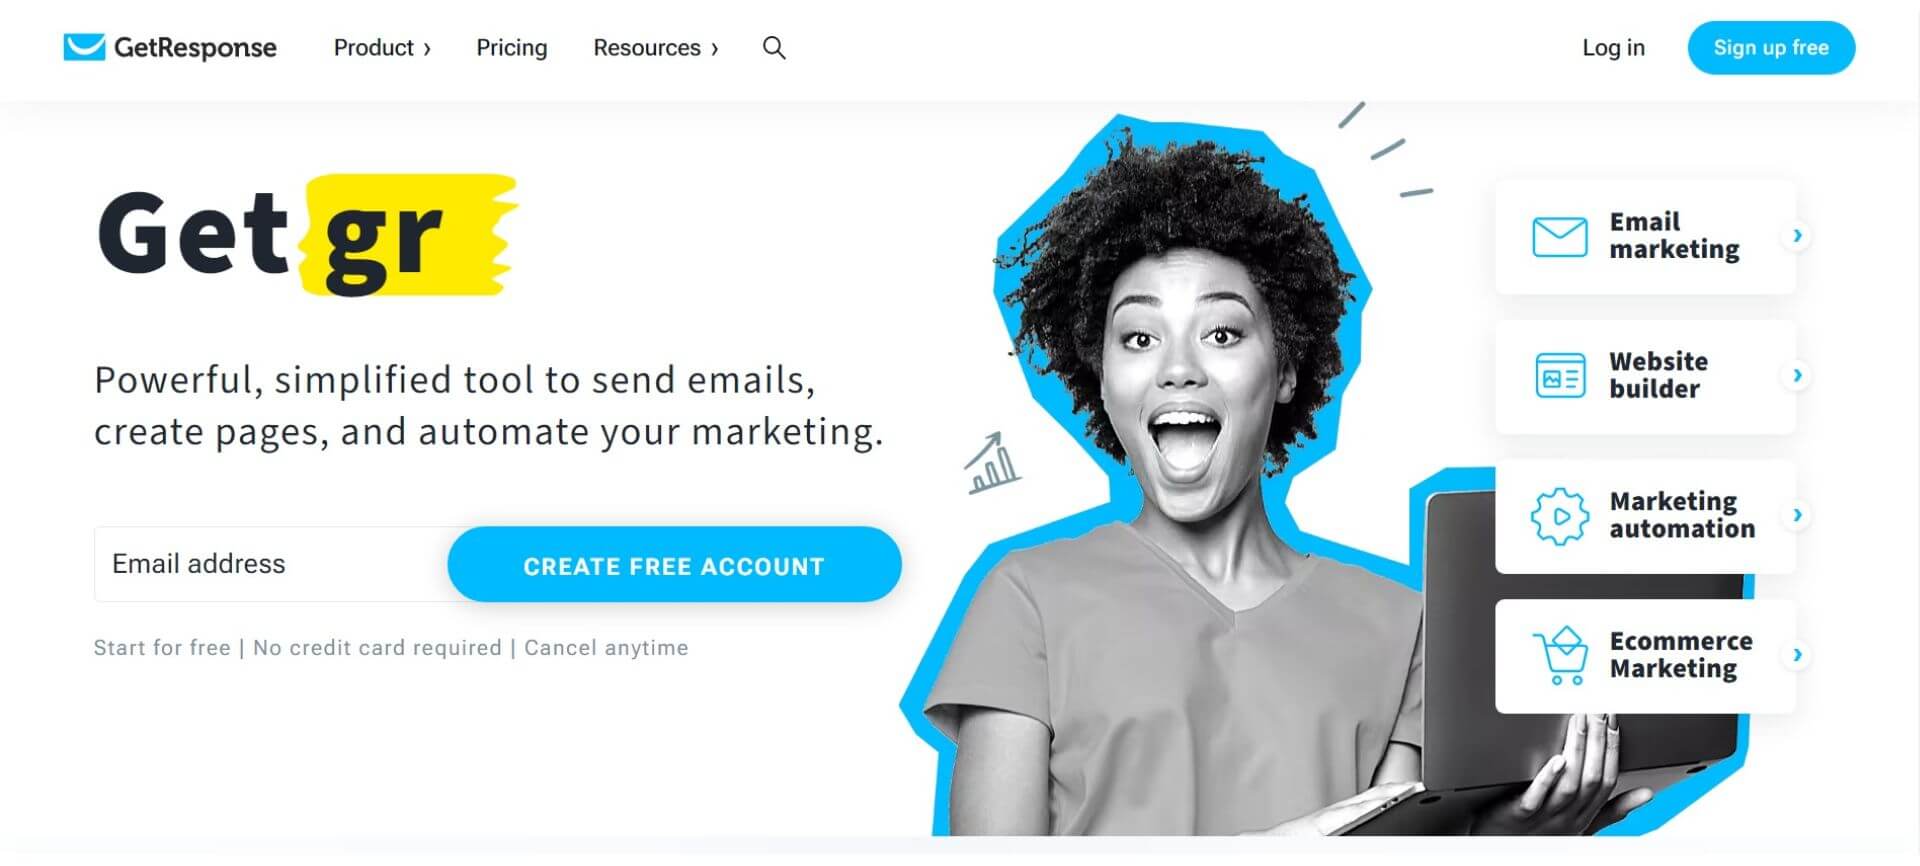 GetResponse is an all-in-one marketing platform